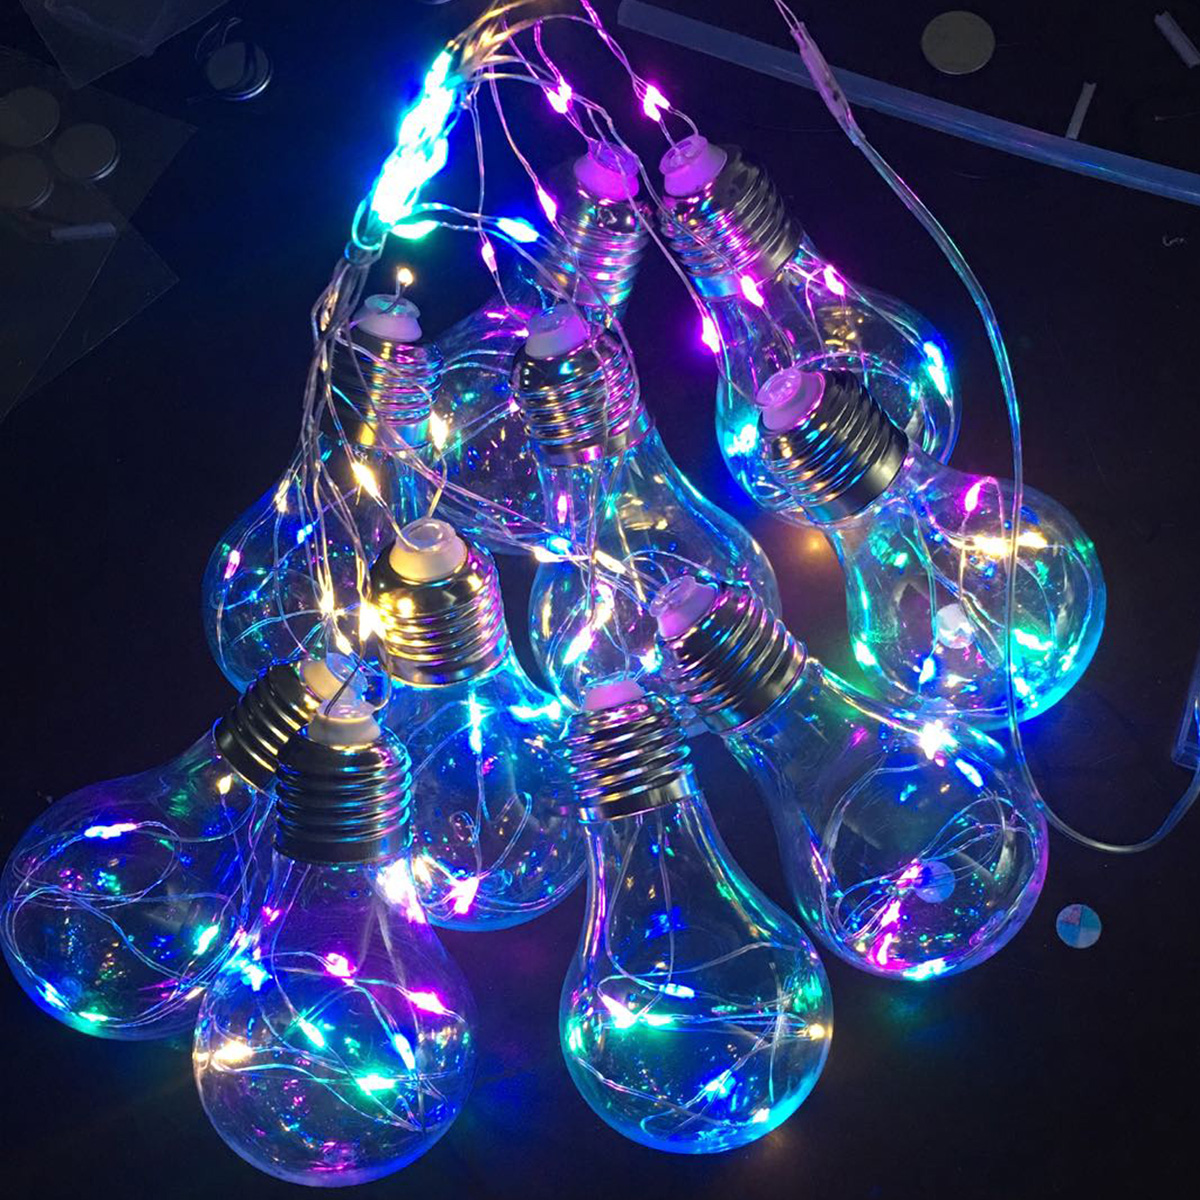 10-Bulbs-Light-Hanging-LED-String-Light-Firefly-Party-Wedding-Home-Decoration-Romantic-1339196-6